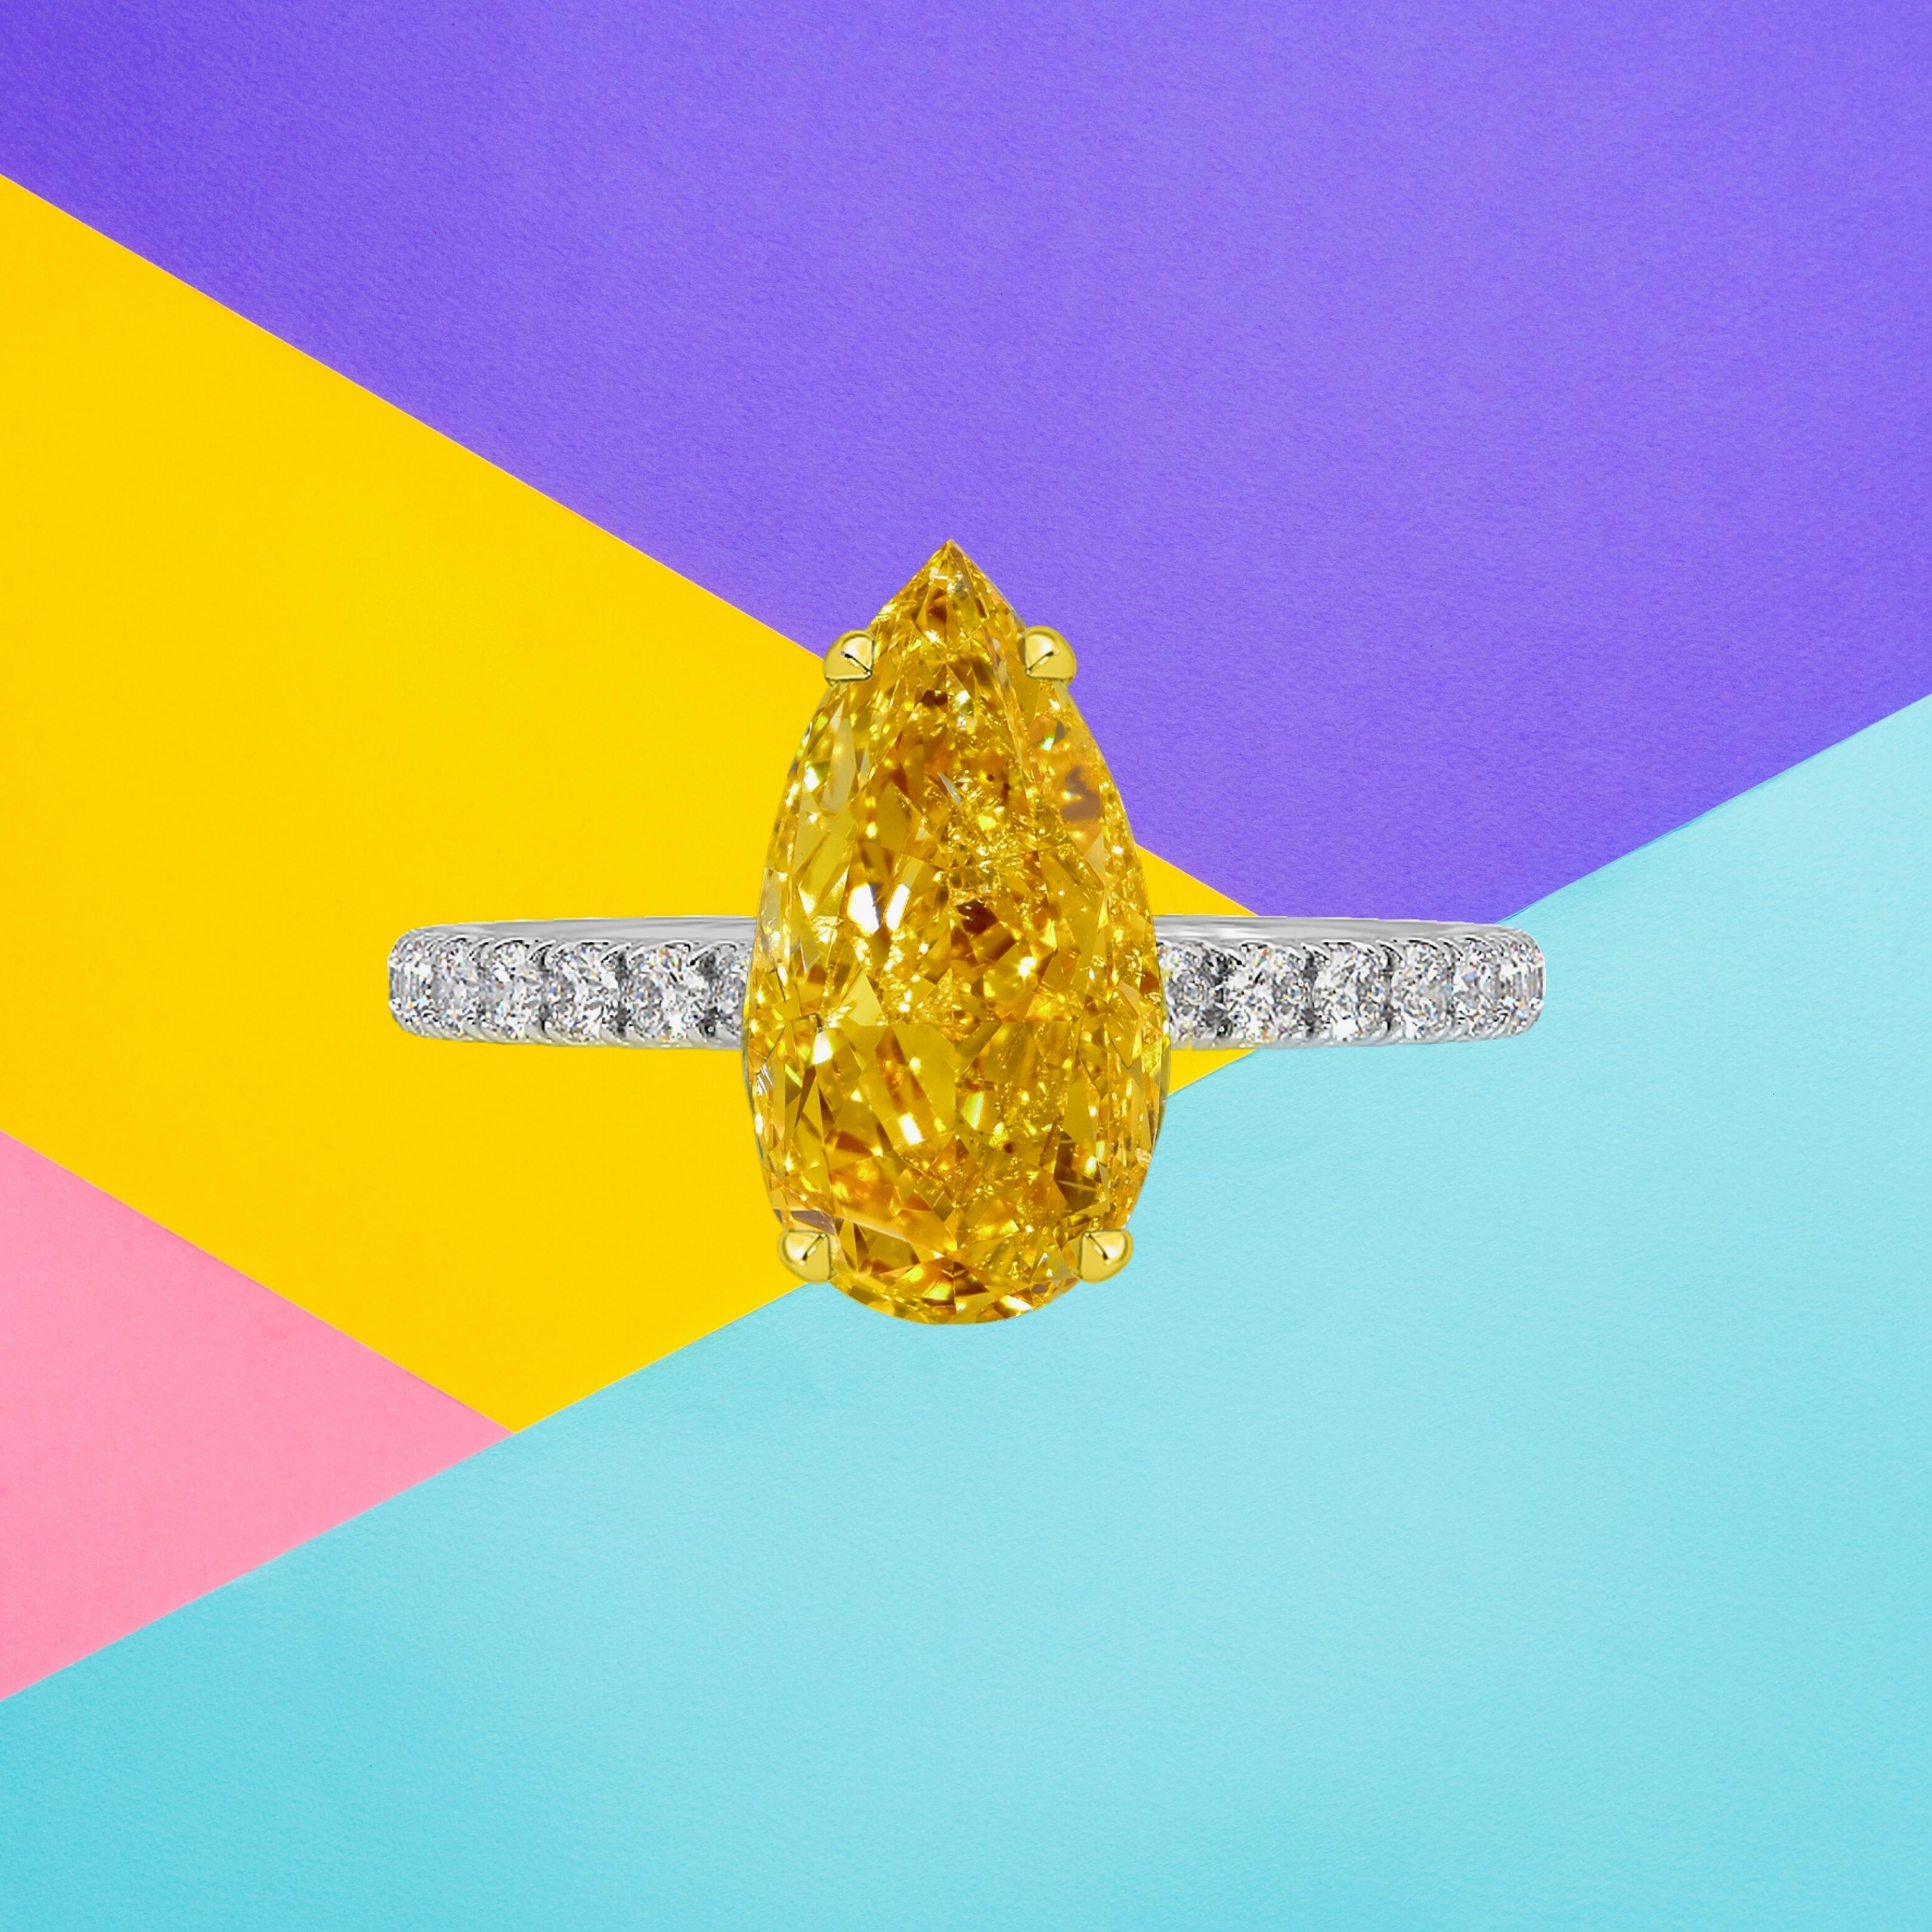 This pear shape diamond weighs 2.08 carat and is certified 'Fancy Vivid Yellow-Orange' color by the Gemmological Institute of America. The GIA has also assigned an I1 clarity grade to the stone. The diamond has been inscribed with the certificate